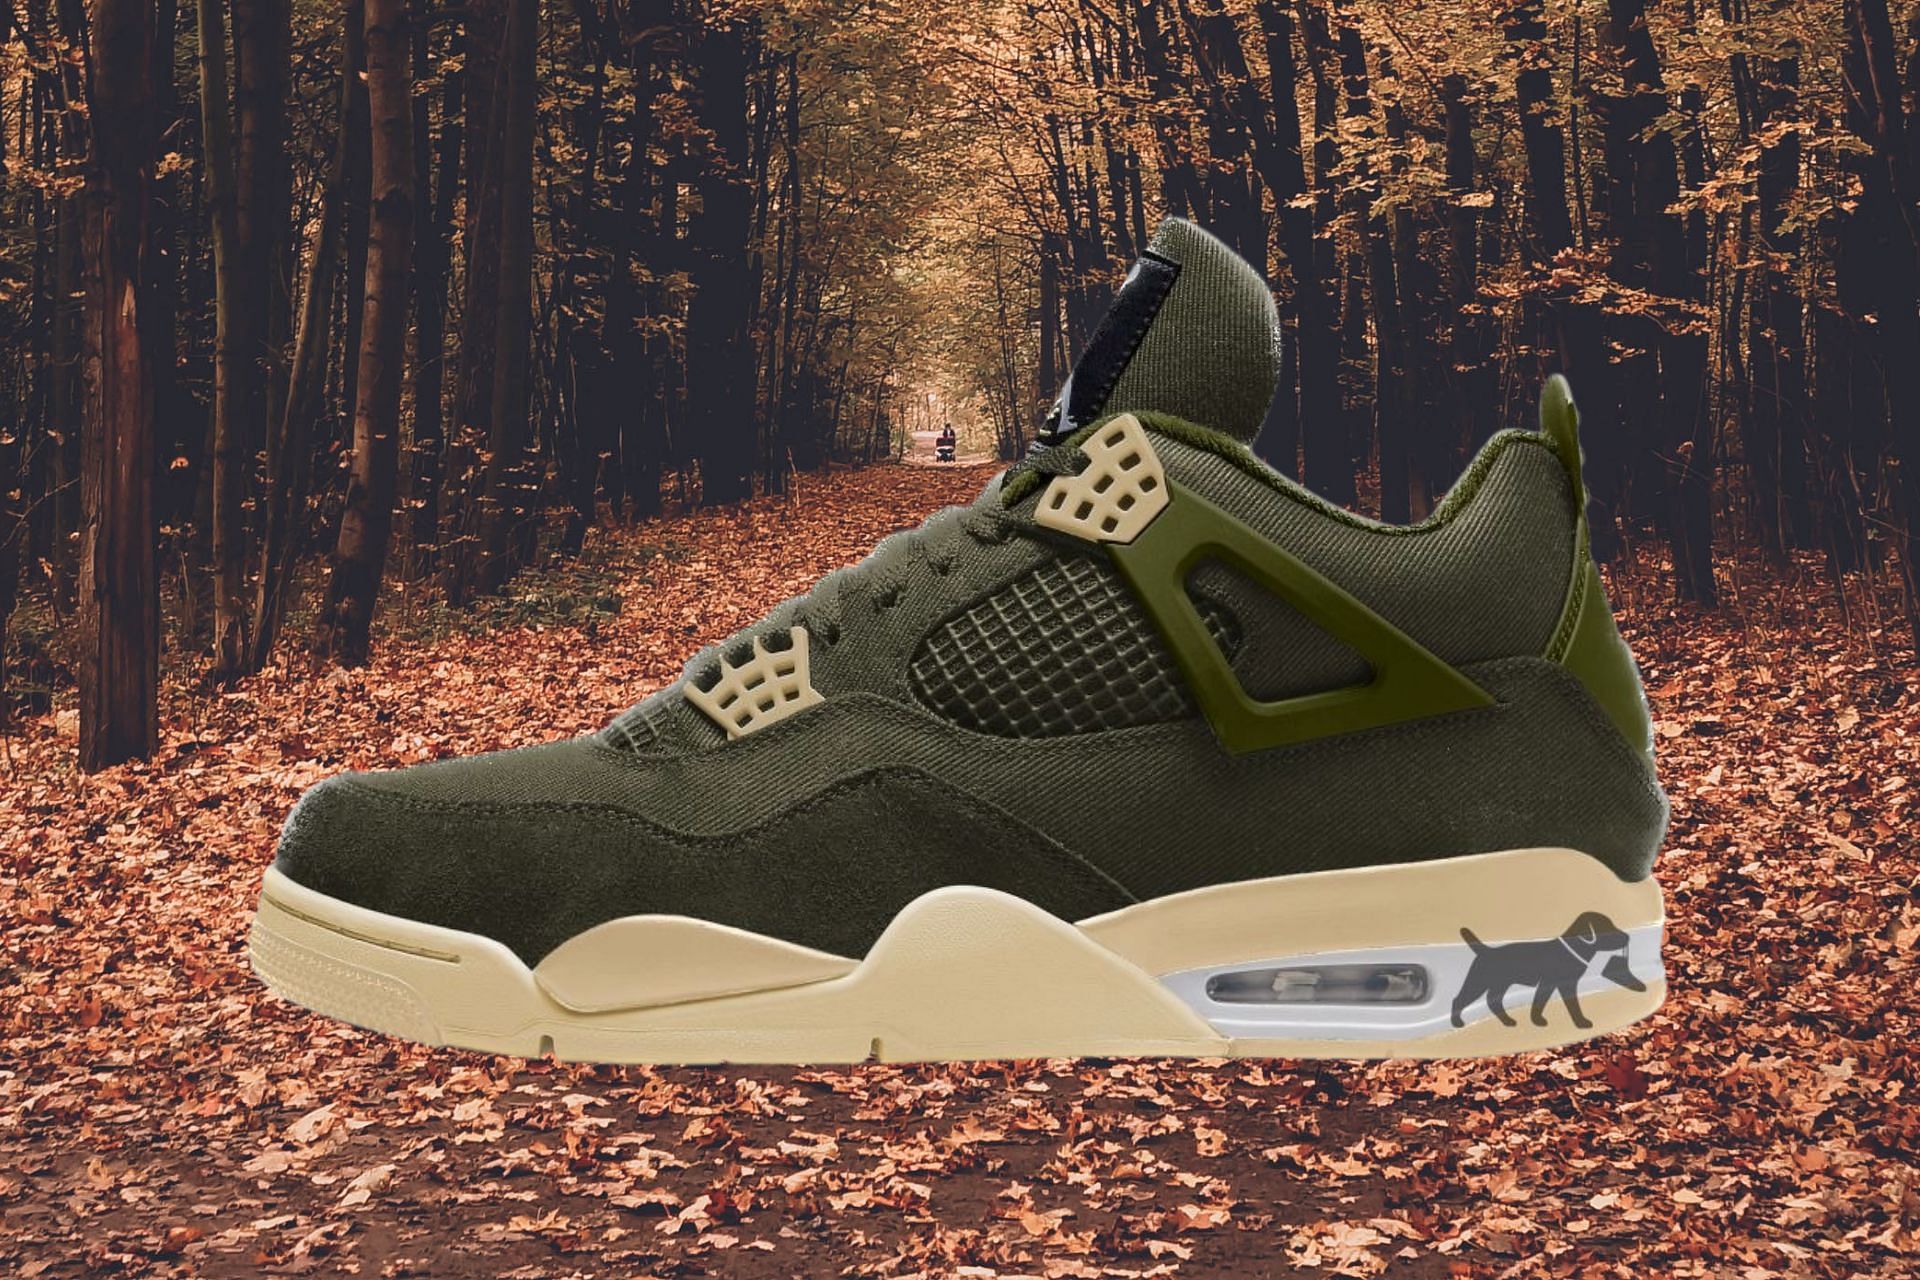 Olive Air Jordan 4 Retro SE Craft "Olive" shoes Where to buy, price